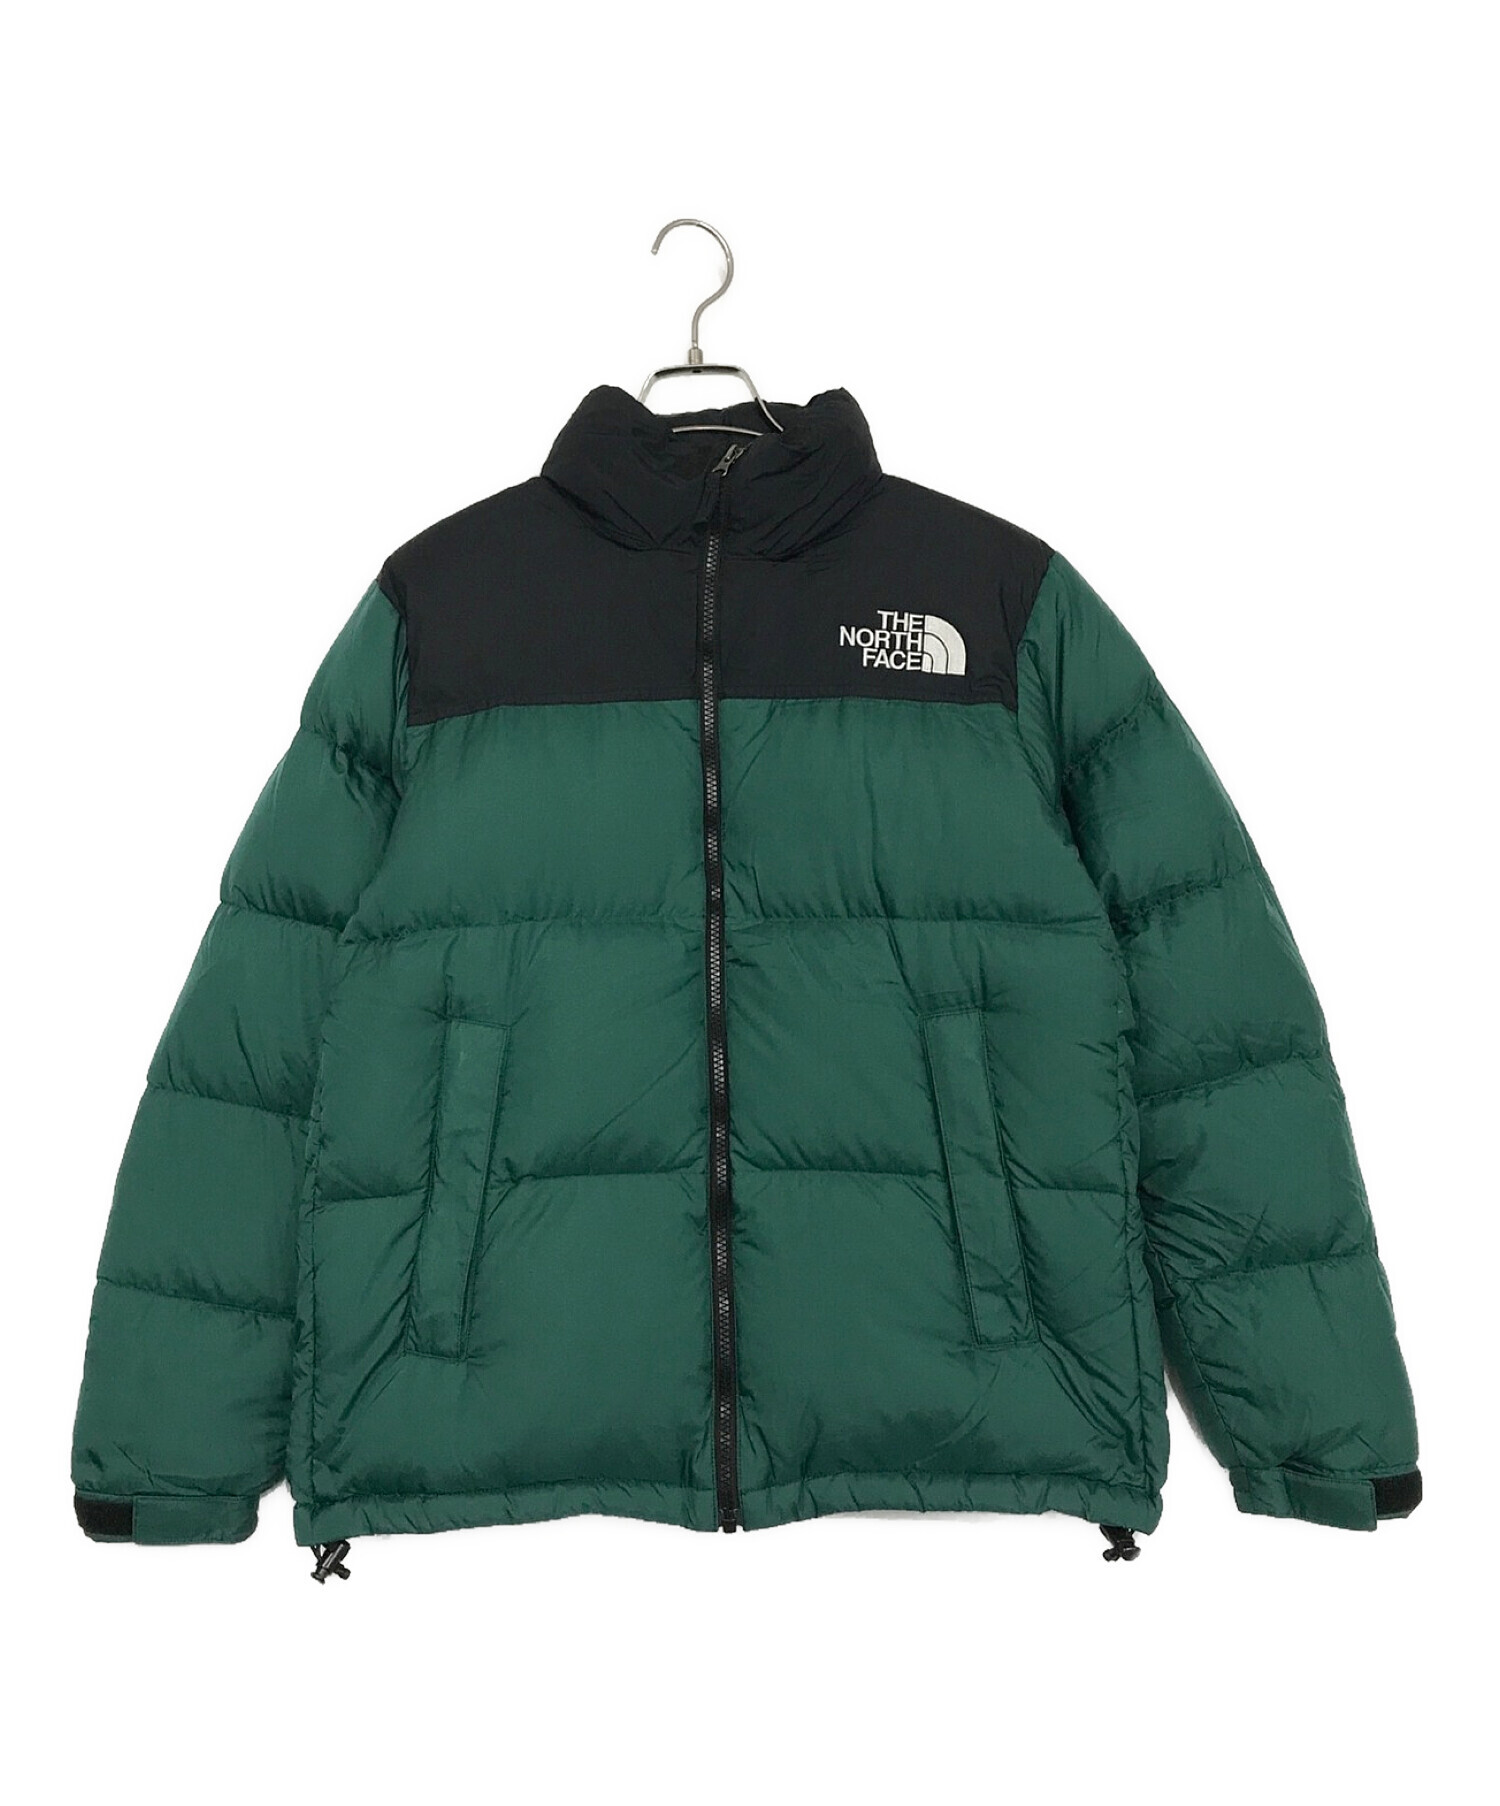 The North Face ヌプシ グリーン S